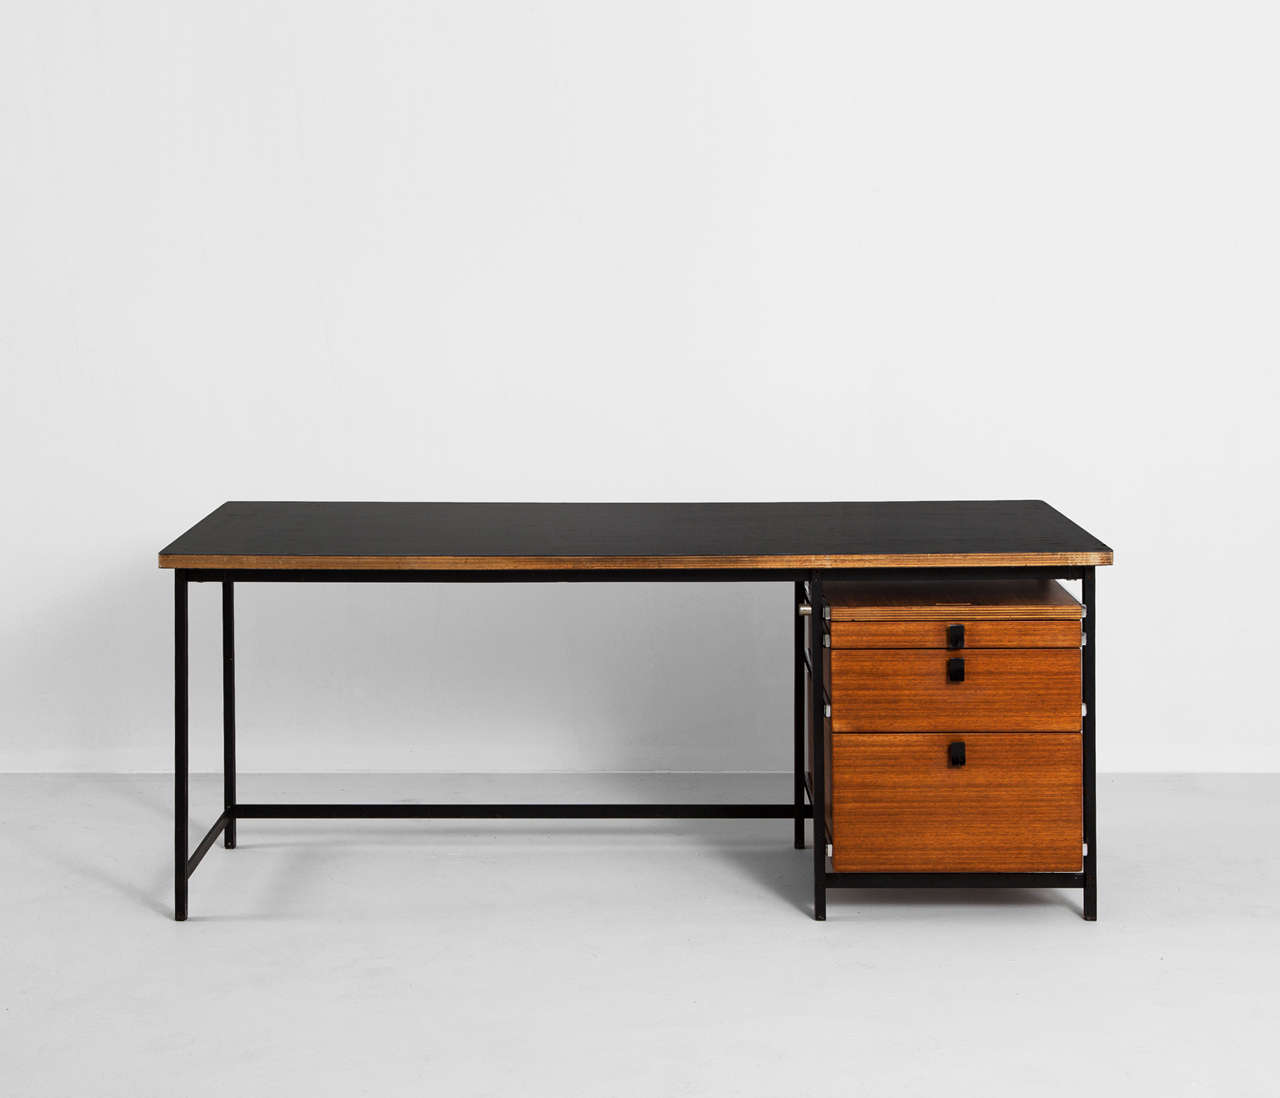 Desk, in steel and teak, by Jules Wabbes for Mobilier Universel, Belgium 1960s.

Early executive desk by Jules Wabbes for Mobilier Universel. This very rare version from the famous Belgium designer has a black metal base with chrome drawer slides.